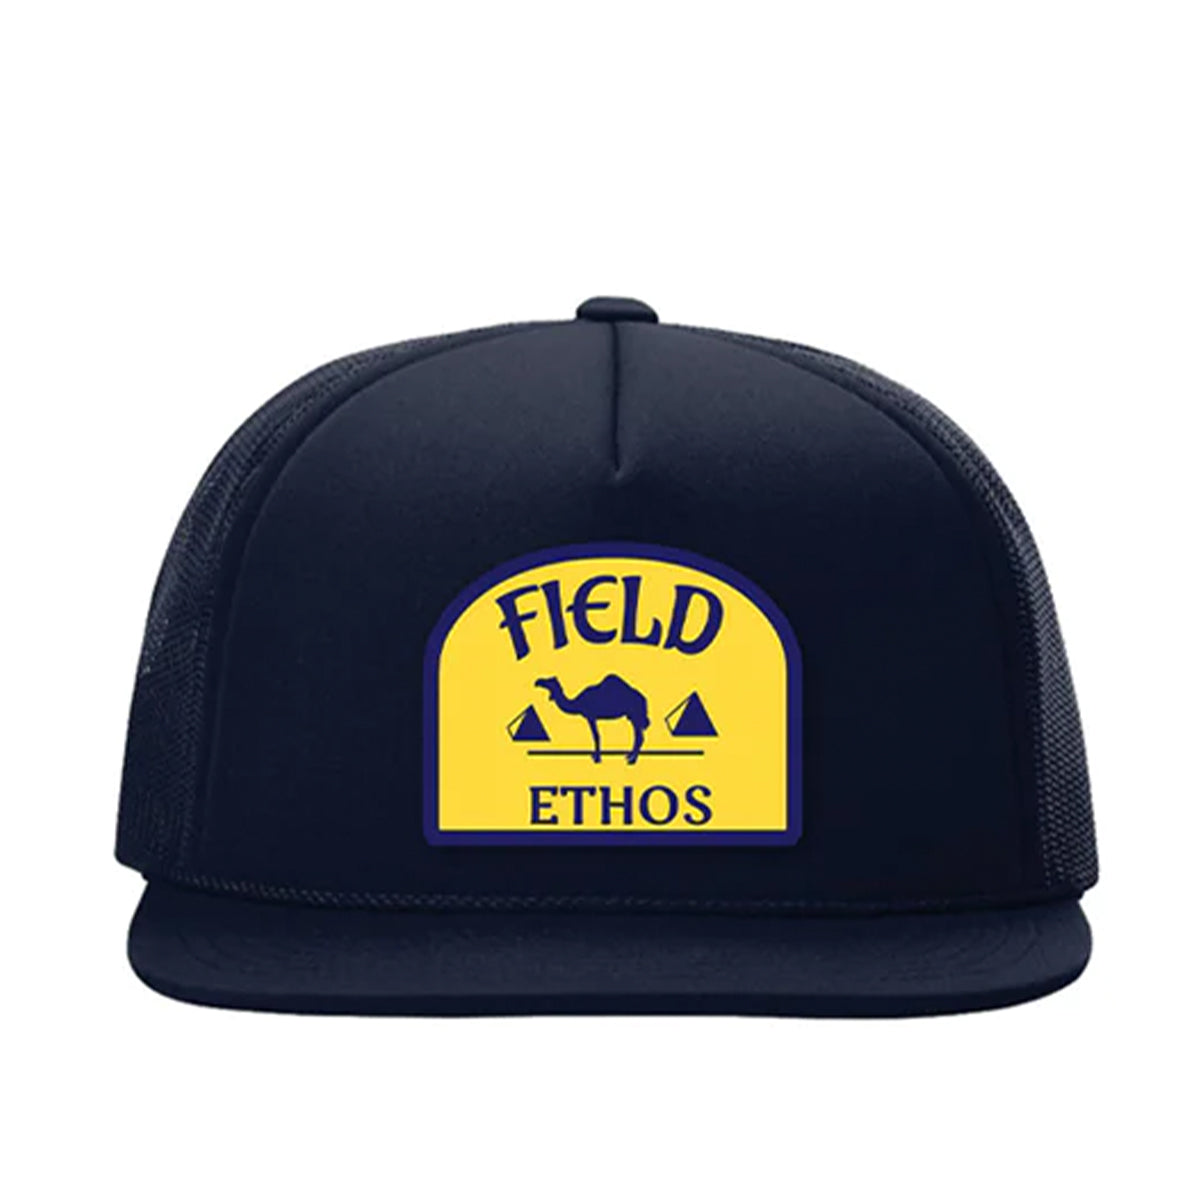 The Field Ethos Rover Hat – Field Ethos Journal